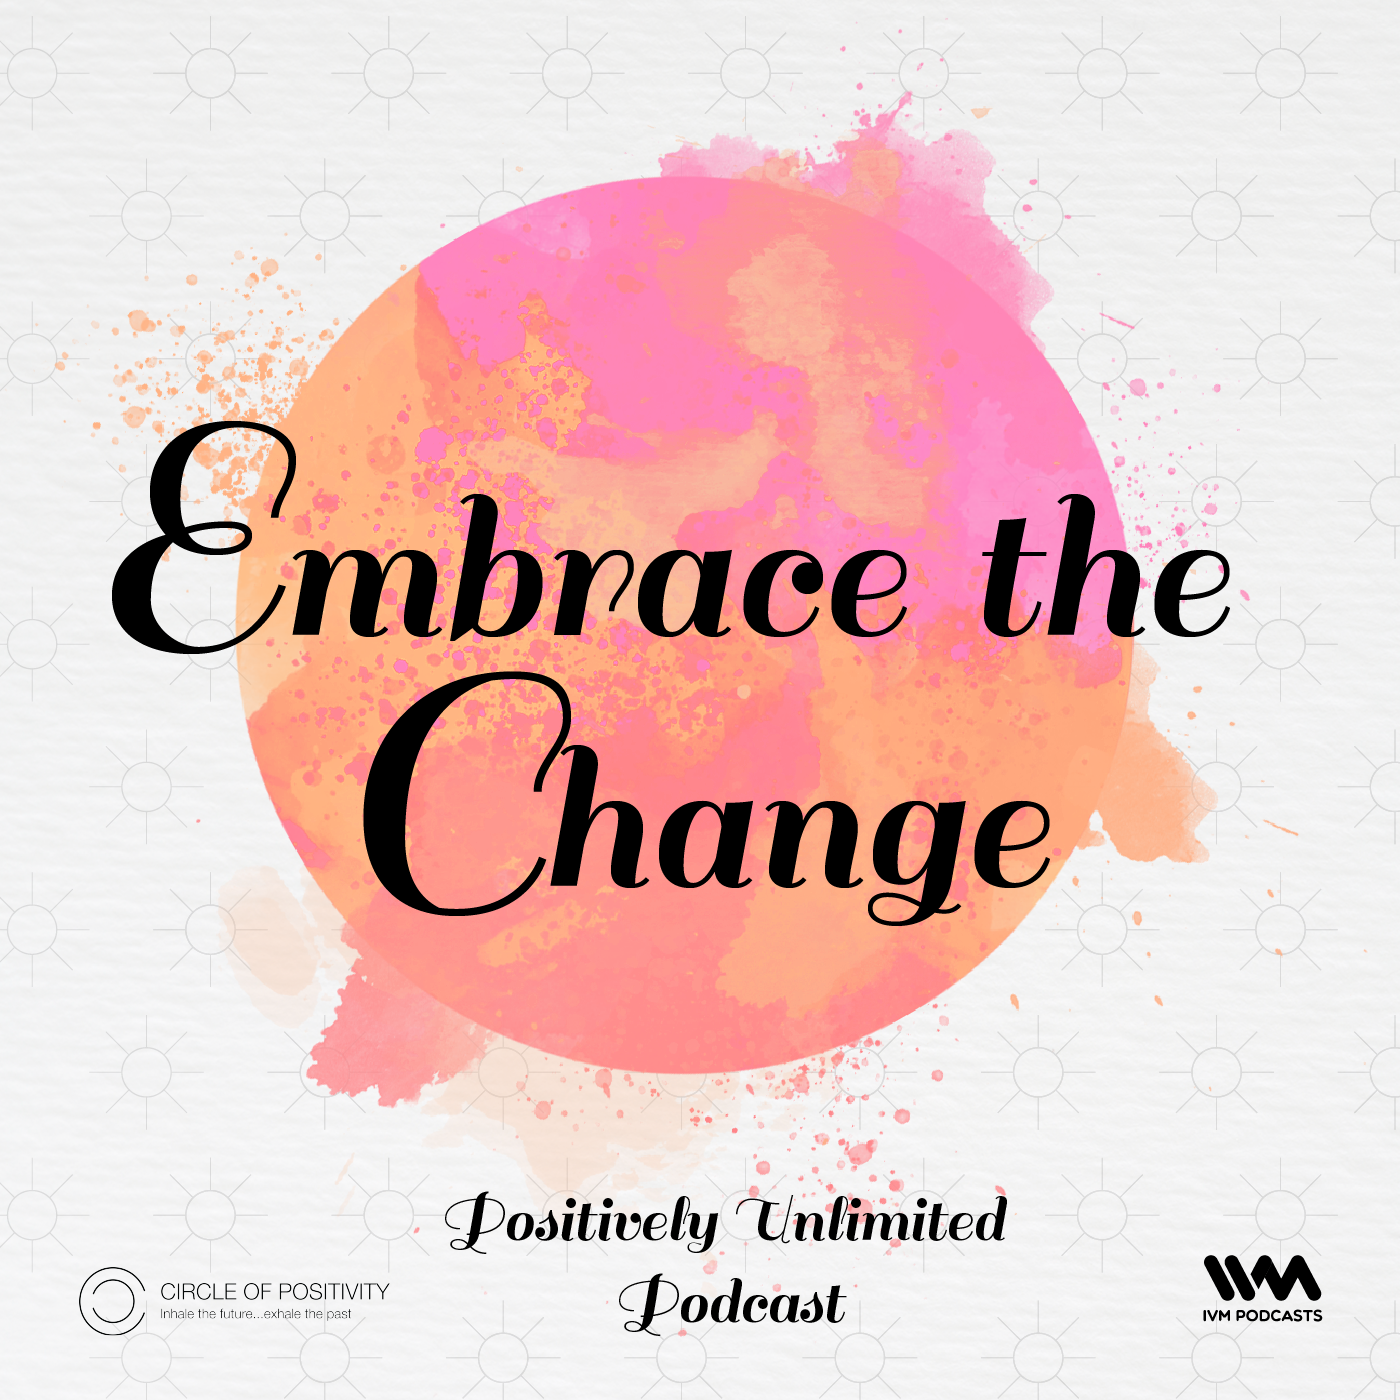 E for Embrace the Change